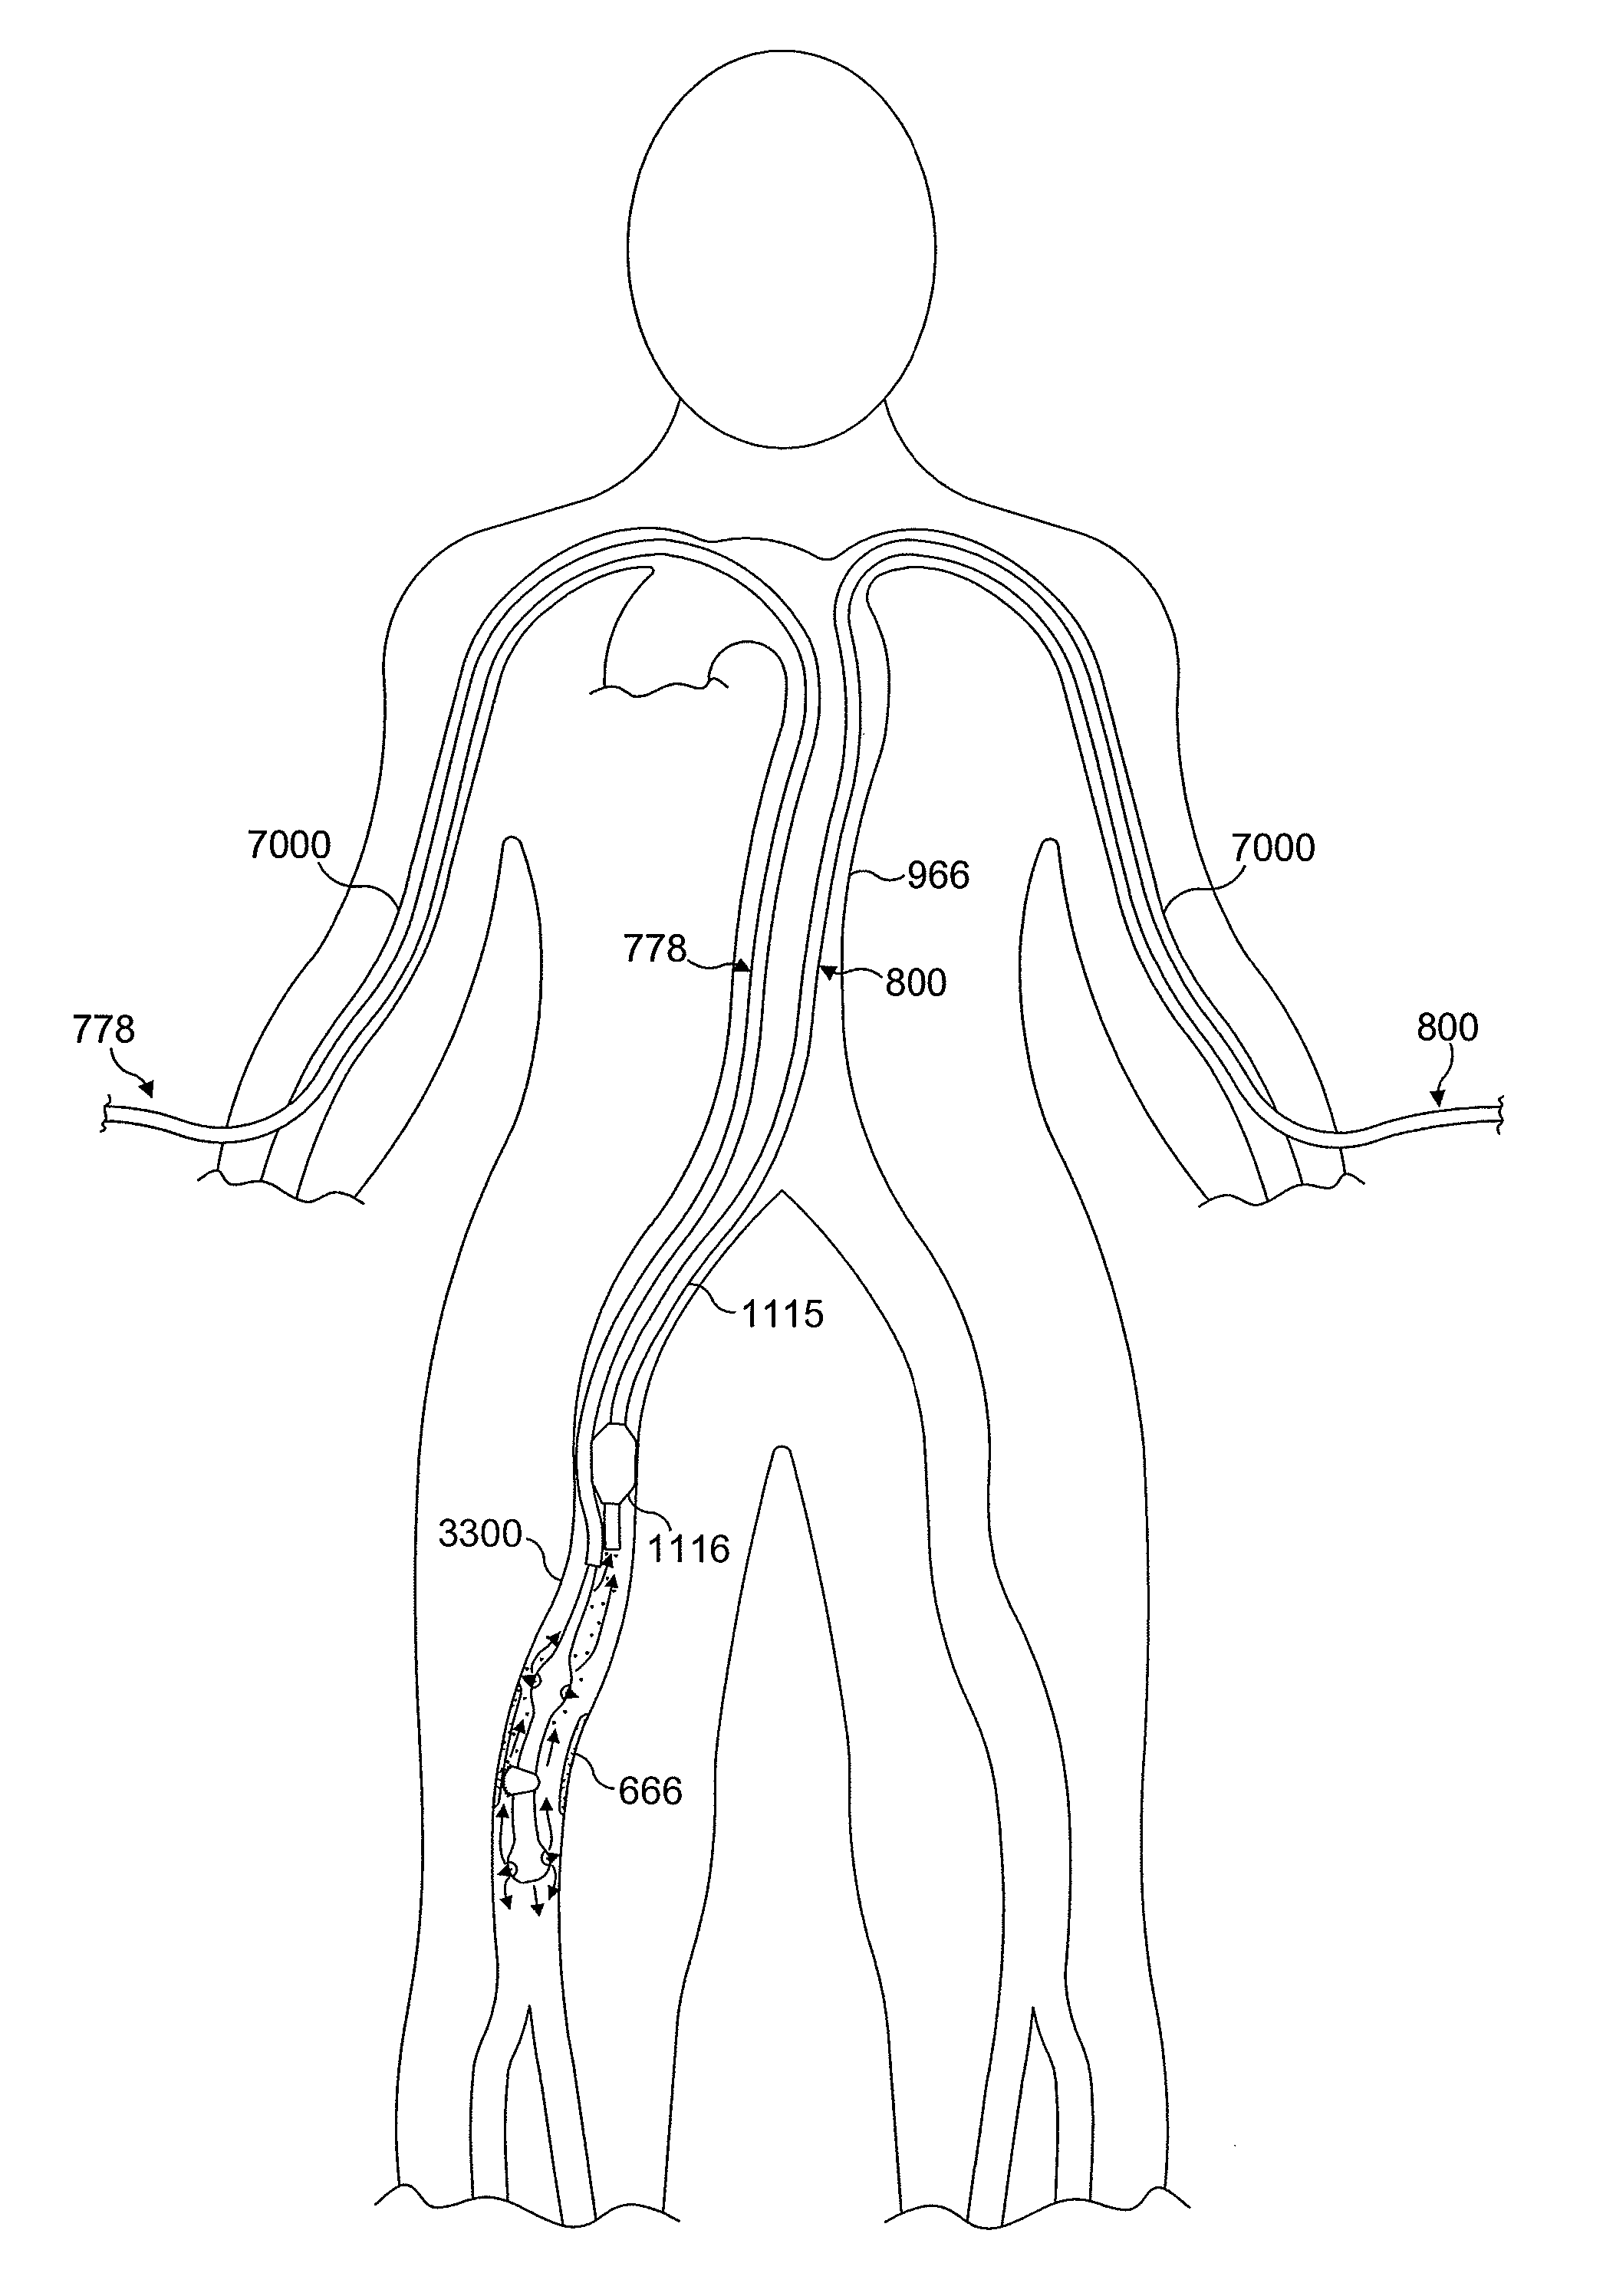 Rotational atherectomy system with enhanced distal protection capability and method of use